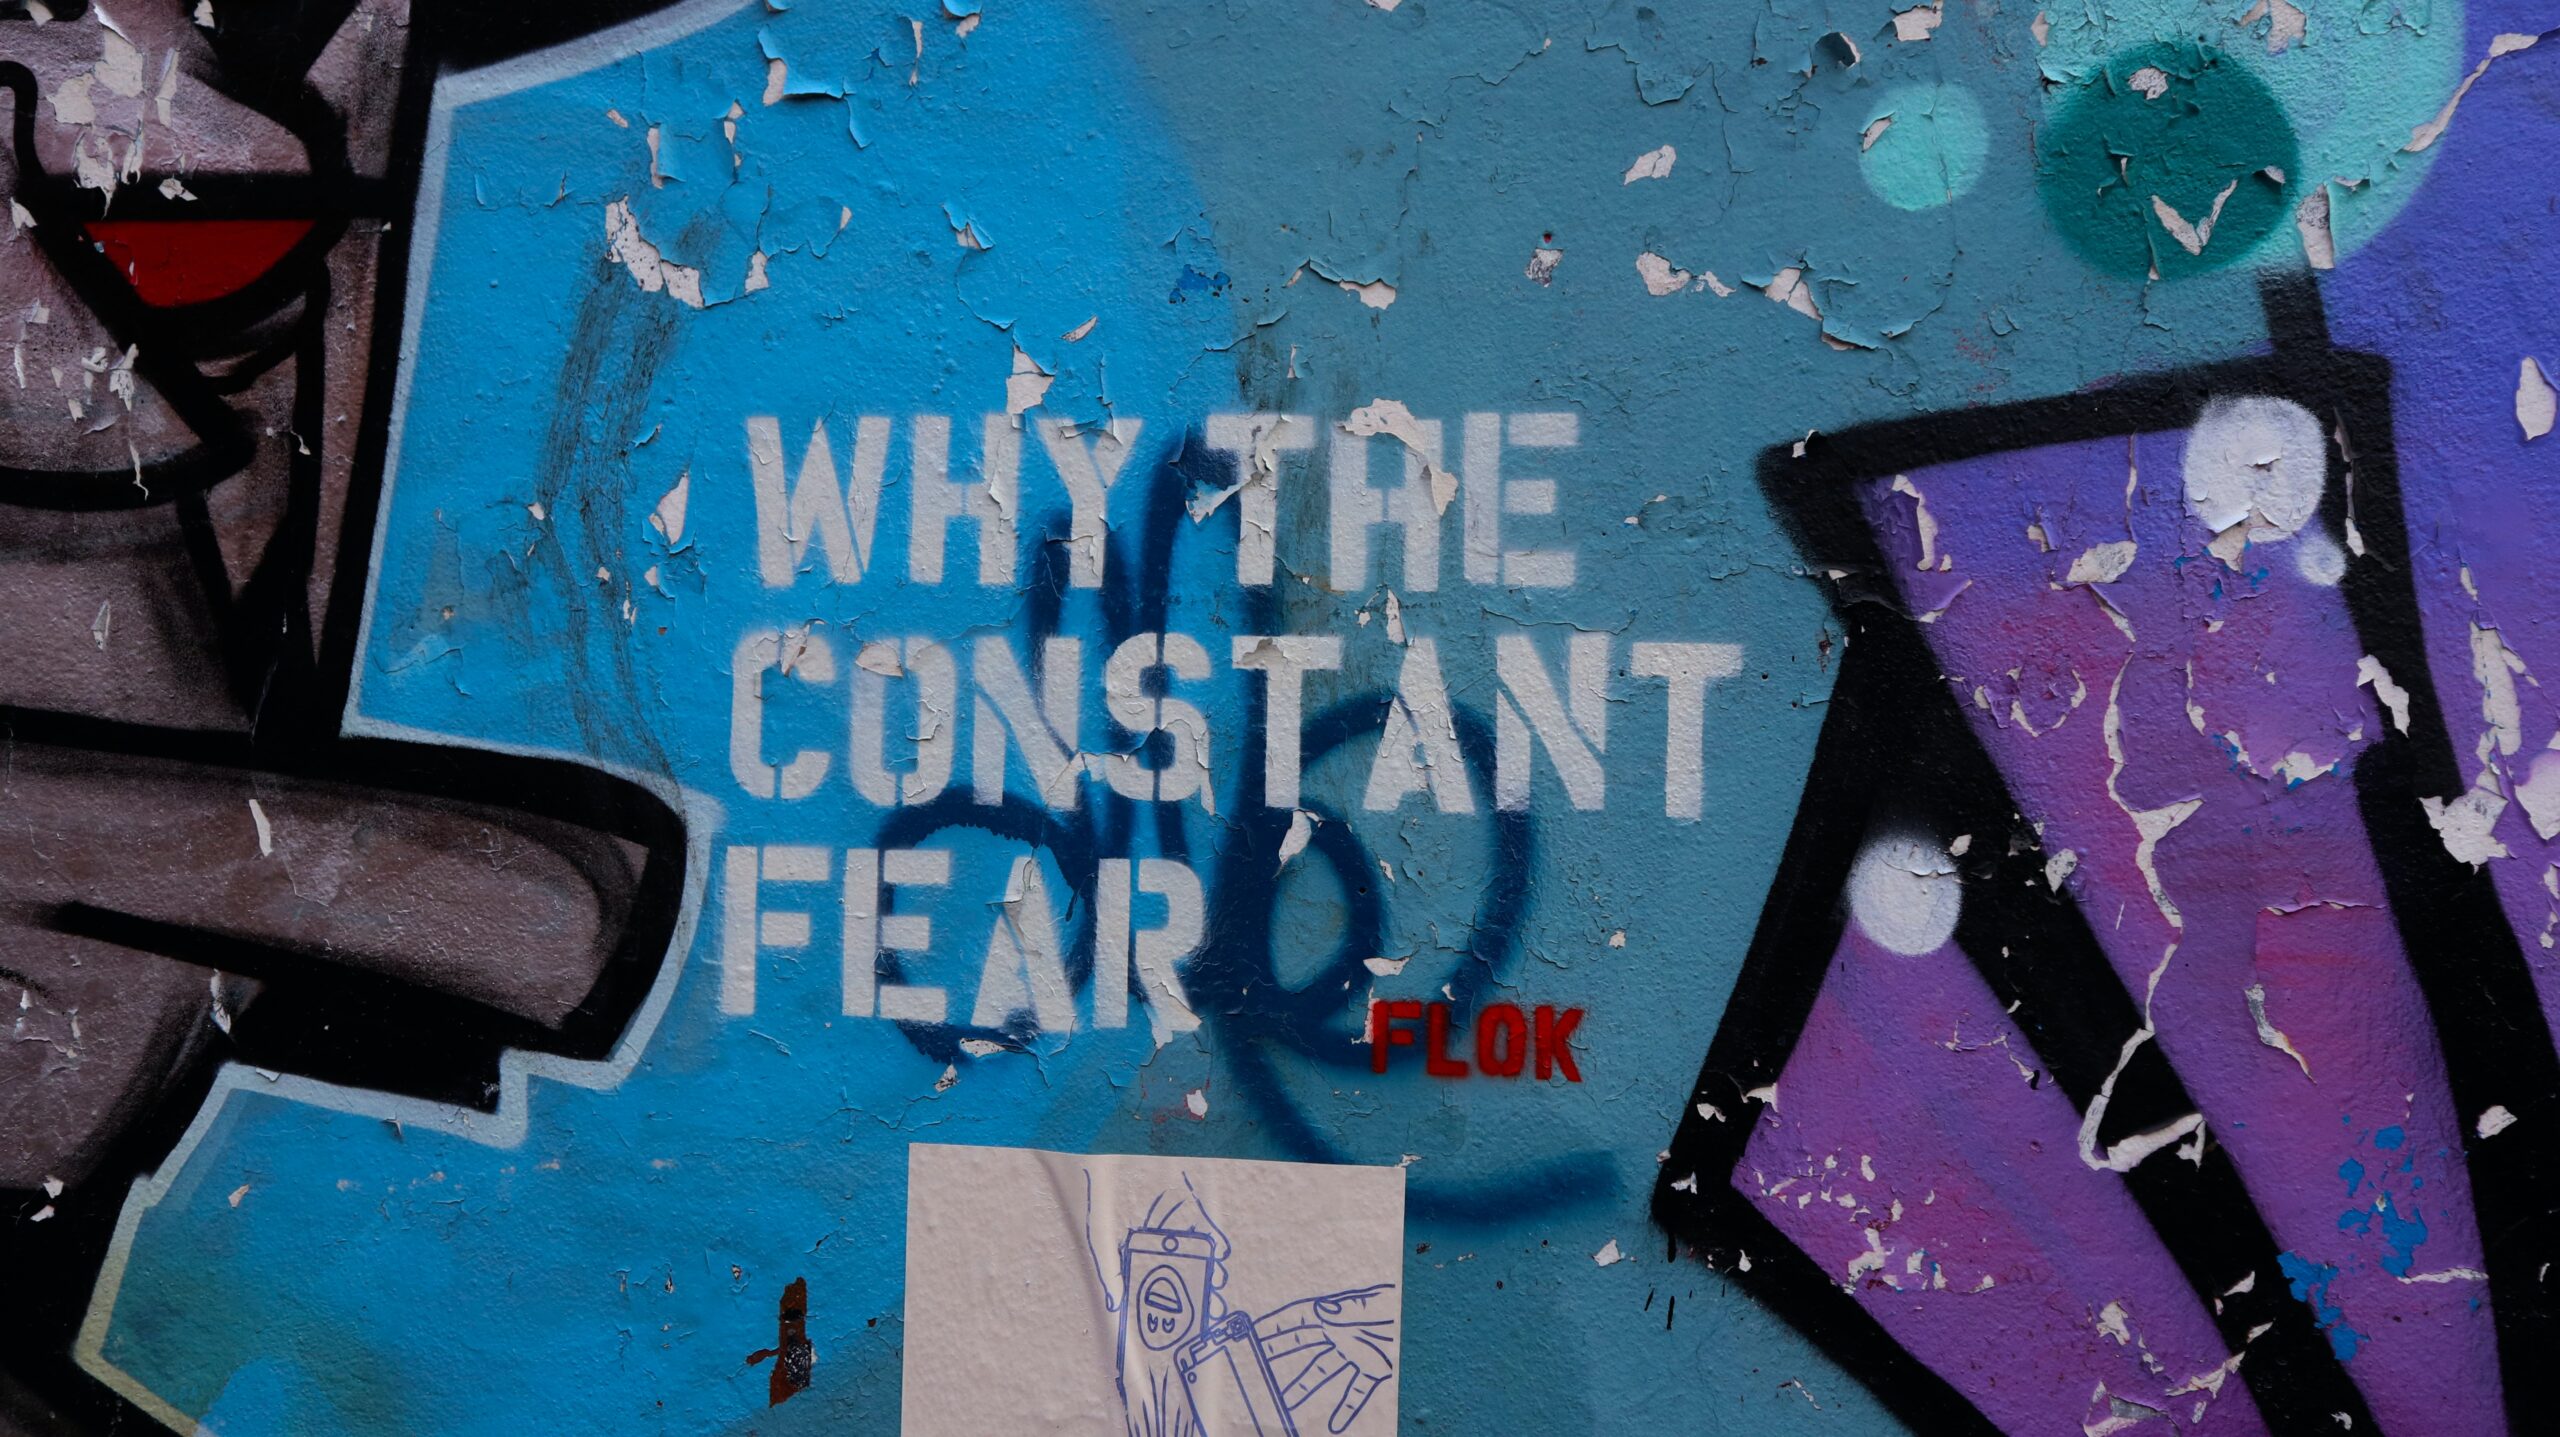 Graffiti "Why the constant fear"